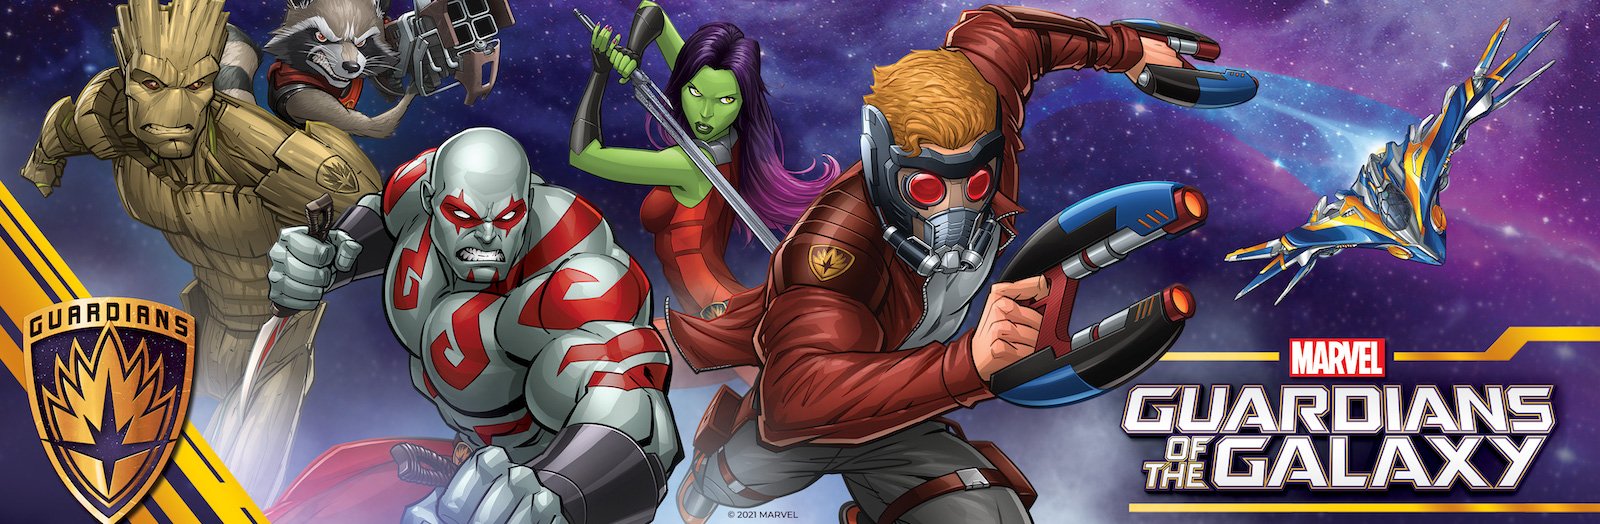 Characters from The Guardians of the Galaxy